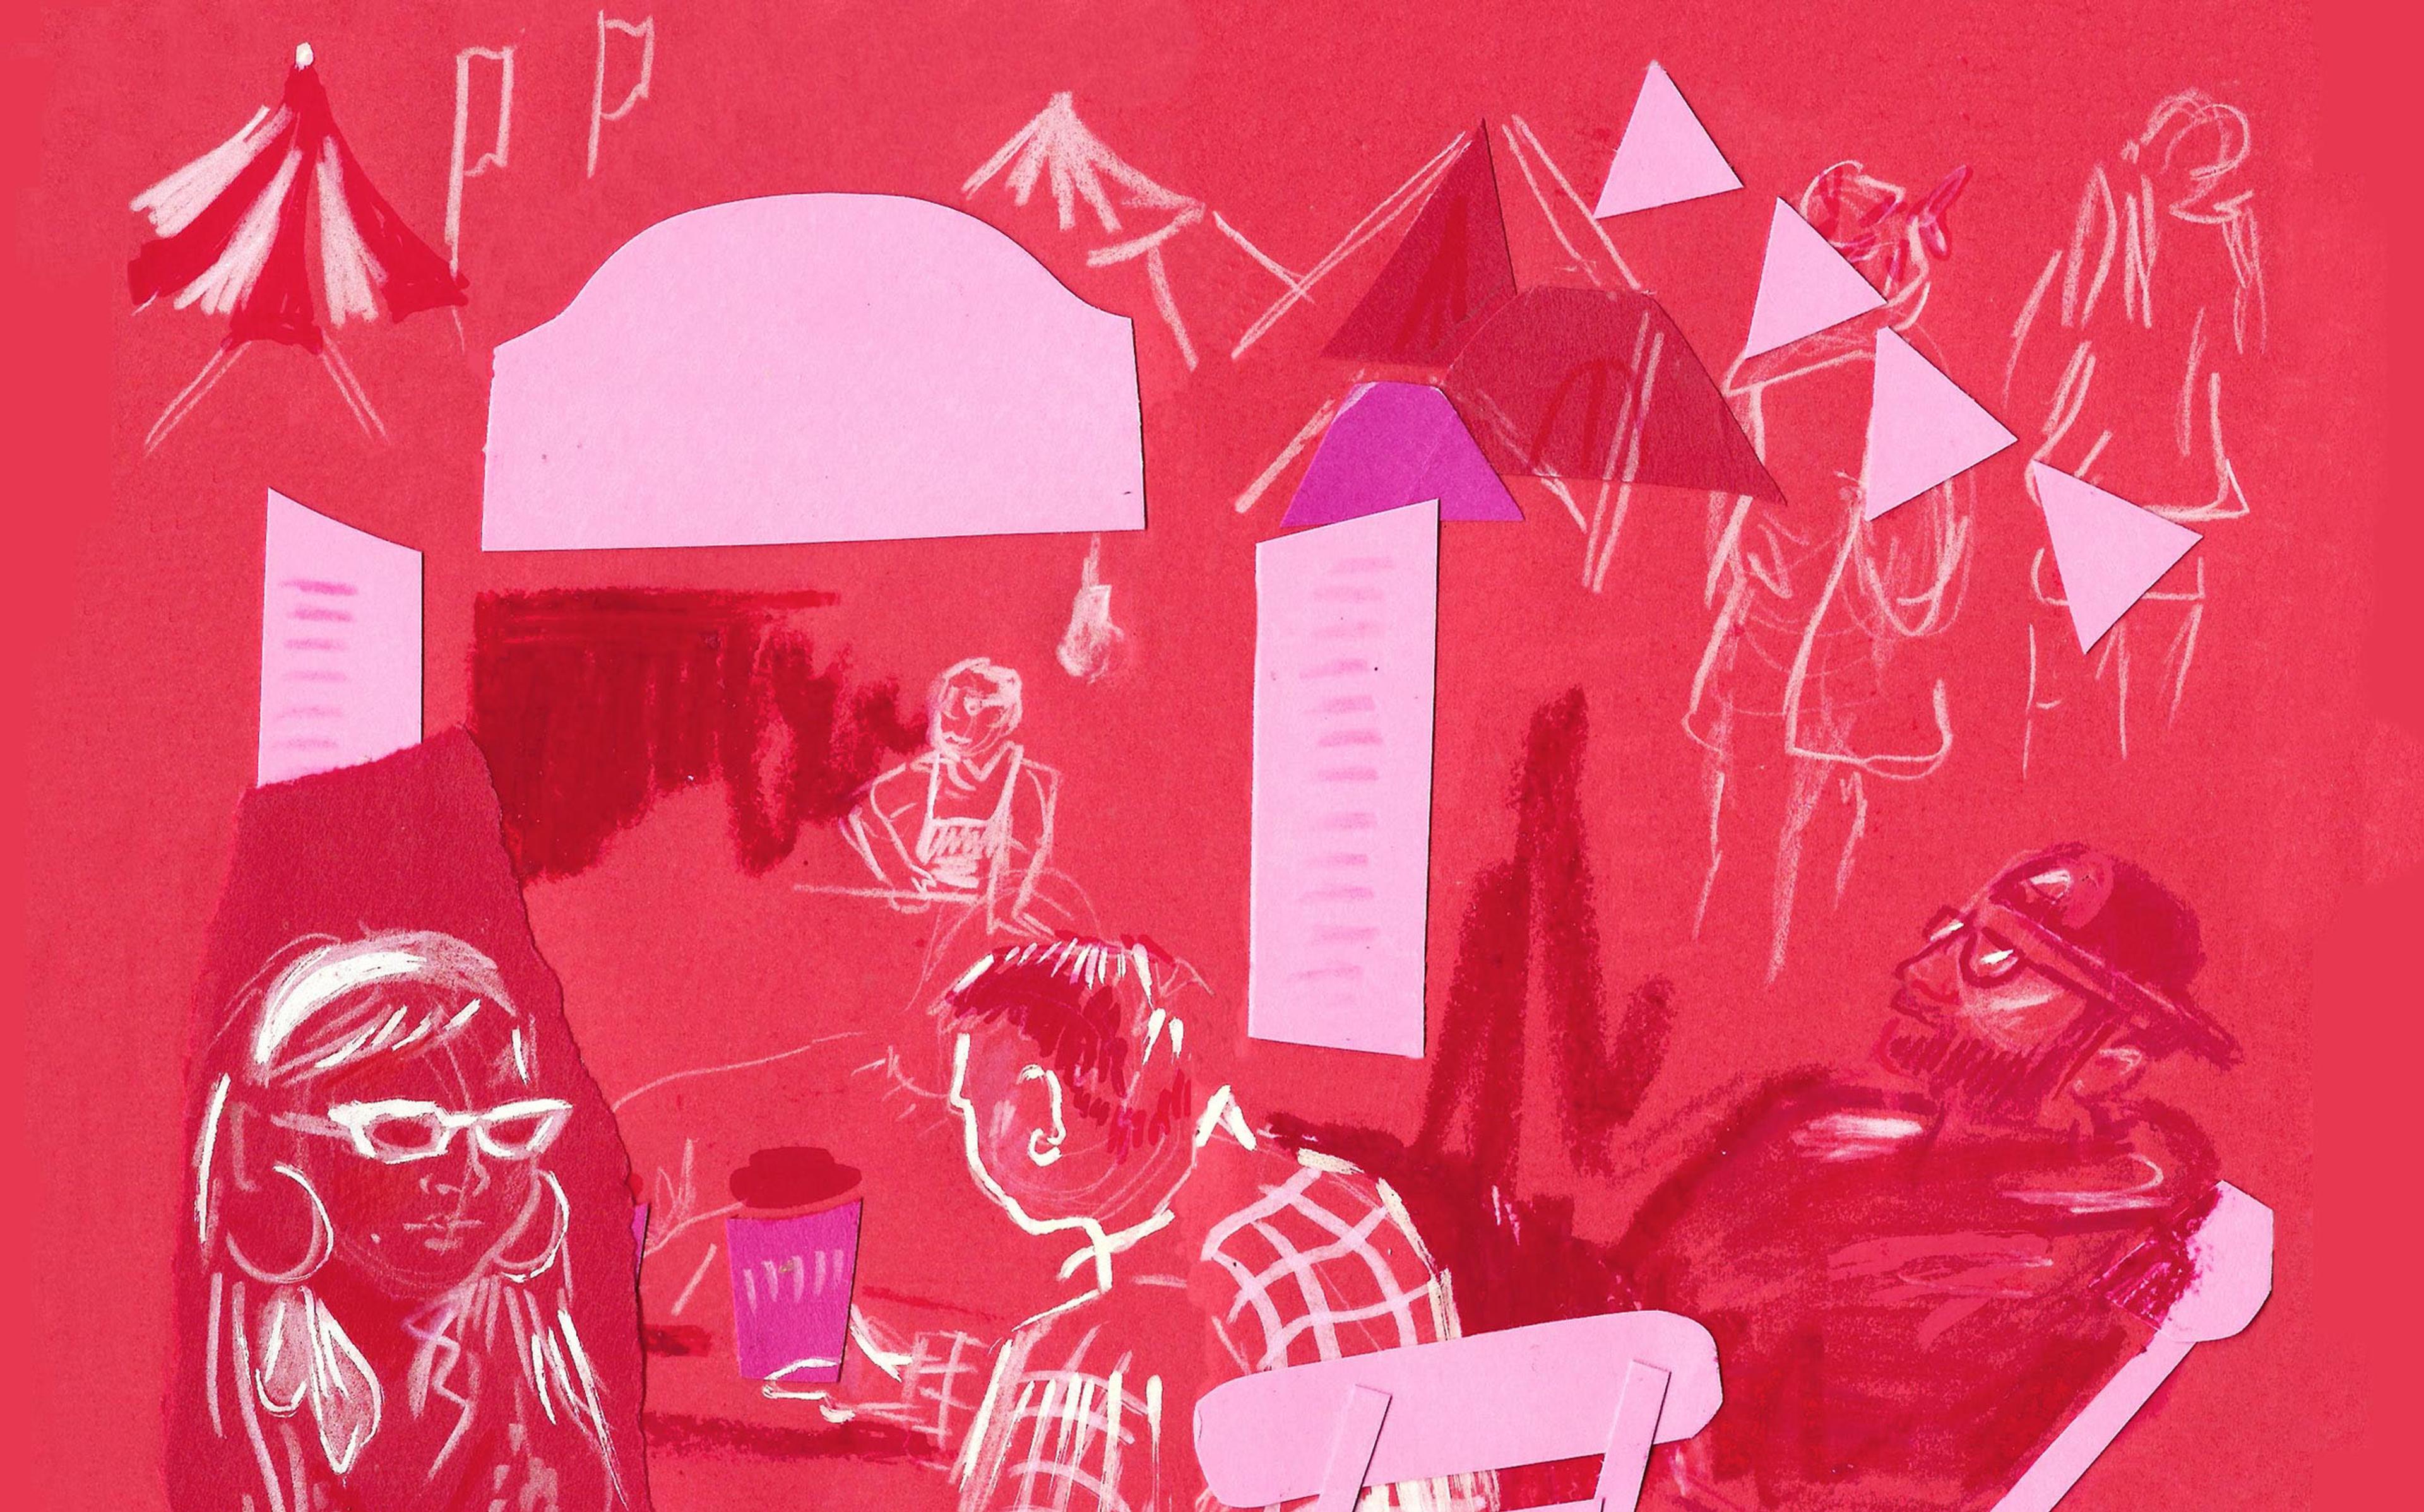 Vivid bright red illustration made with white marks on paper, and collage. People sit around under bunting, drinking, listening to music, and relaxing.